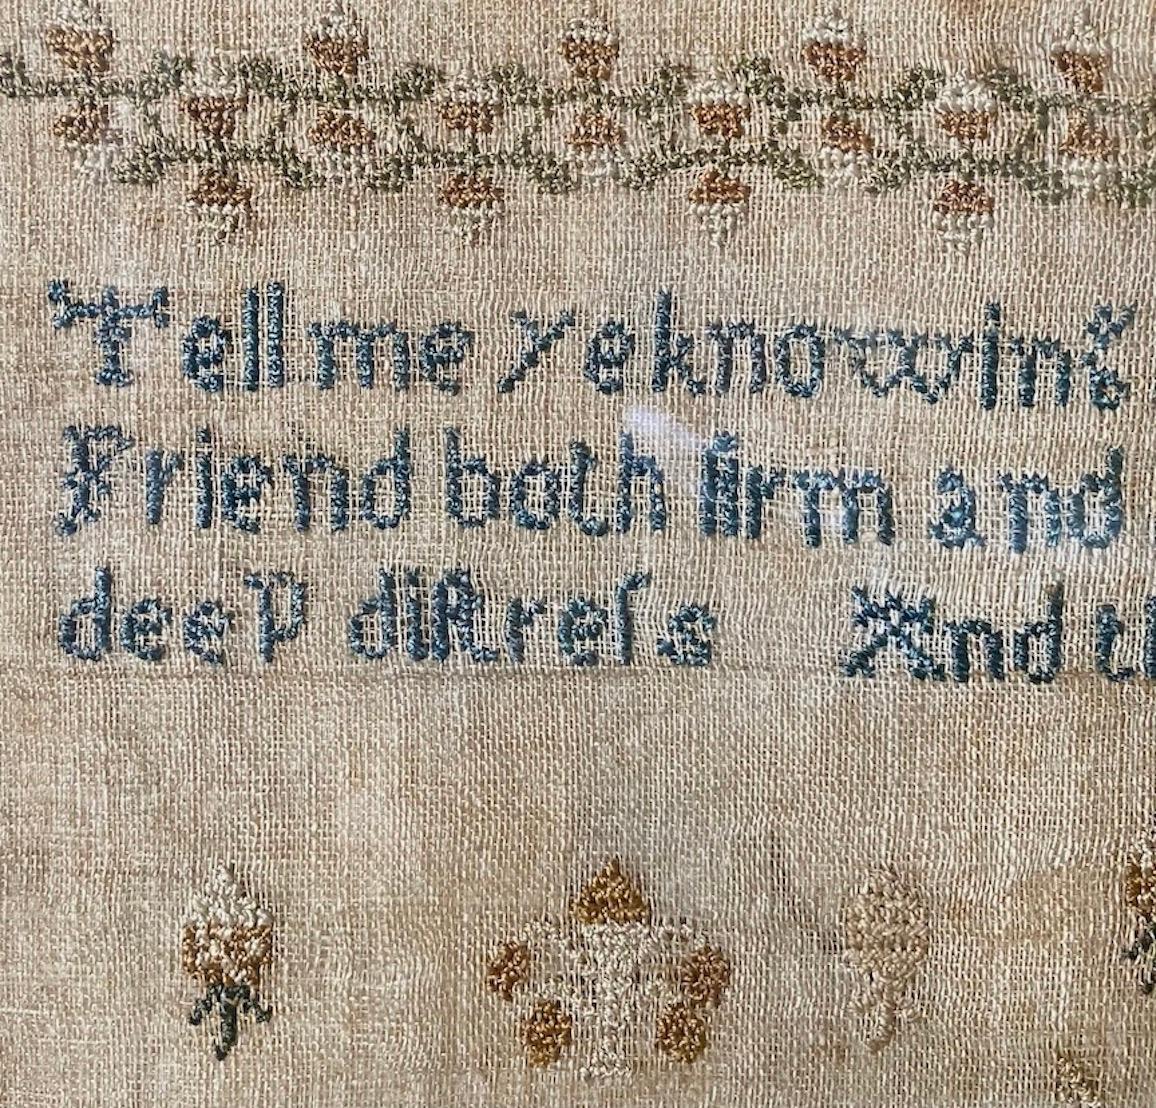 Hand-Crafted Early 19th Century Needle Work Sampler by Ann Gould